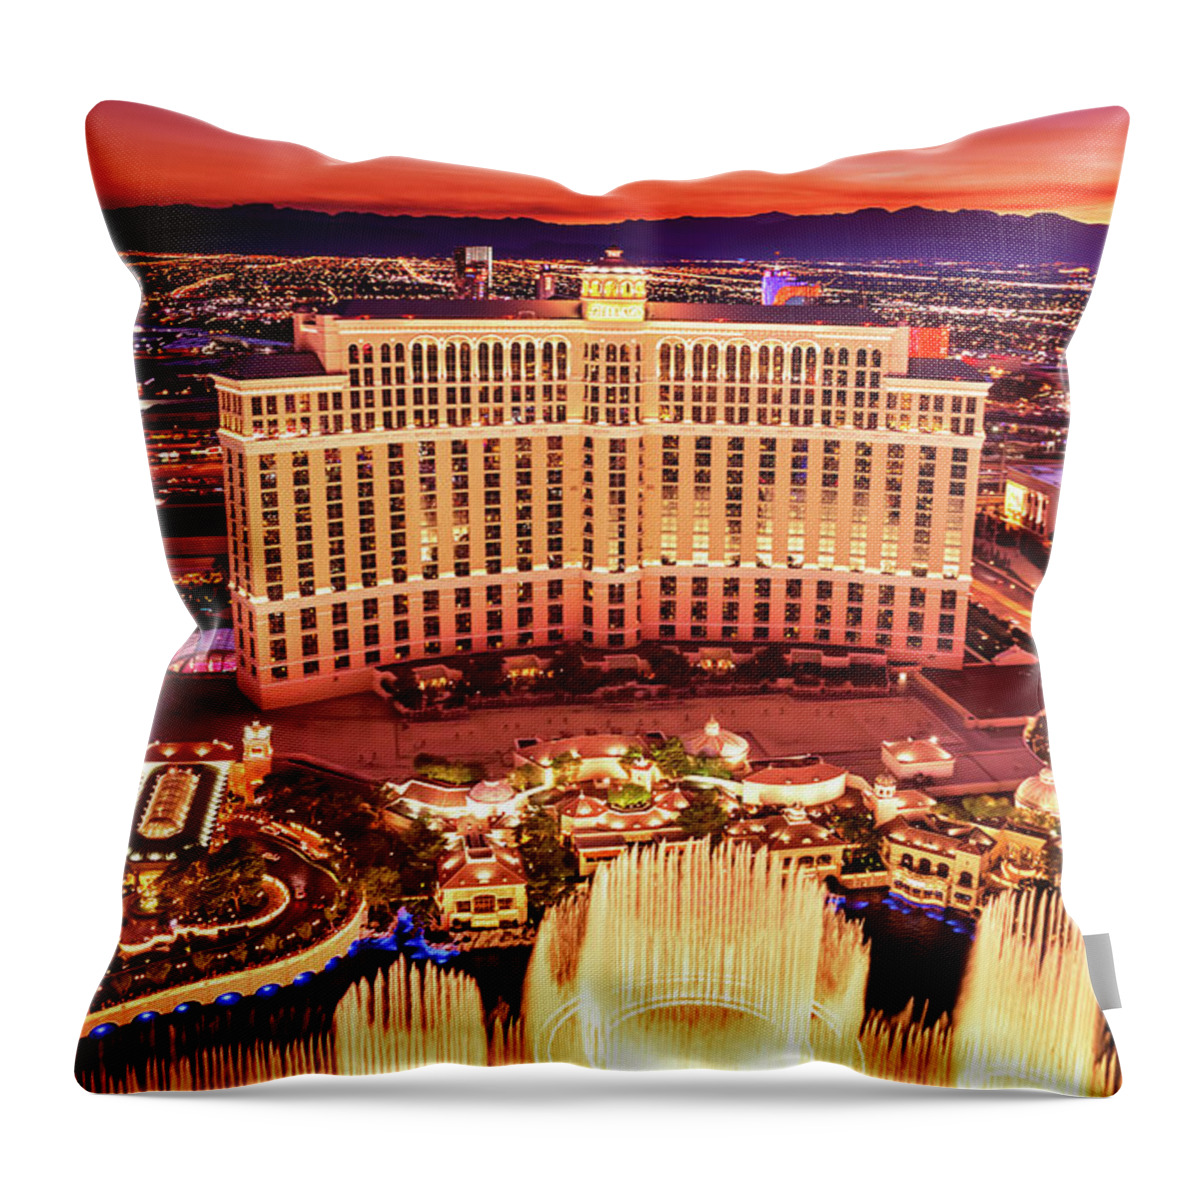 Bellagio Throw Pillow featuring the photograph The Bellagio Fountains after Sunset Portrait by Aloha Art